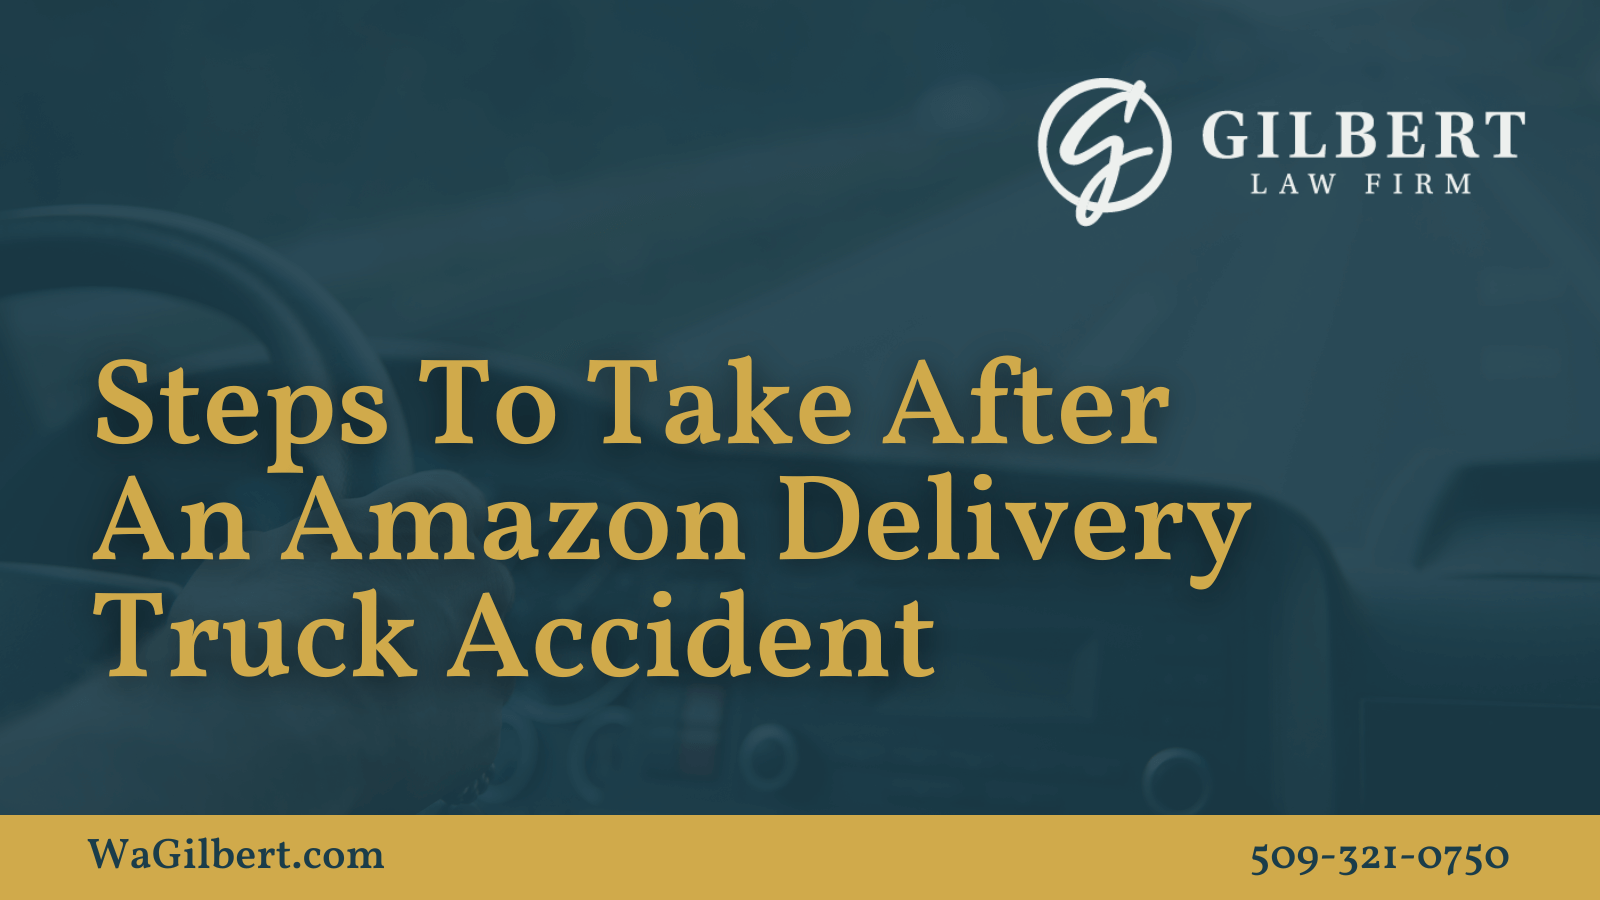 Steps To Take After An Amazon Delivery Truck Accident | Gilbert Law Firm Spokane Washington